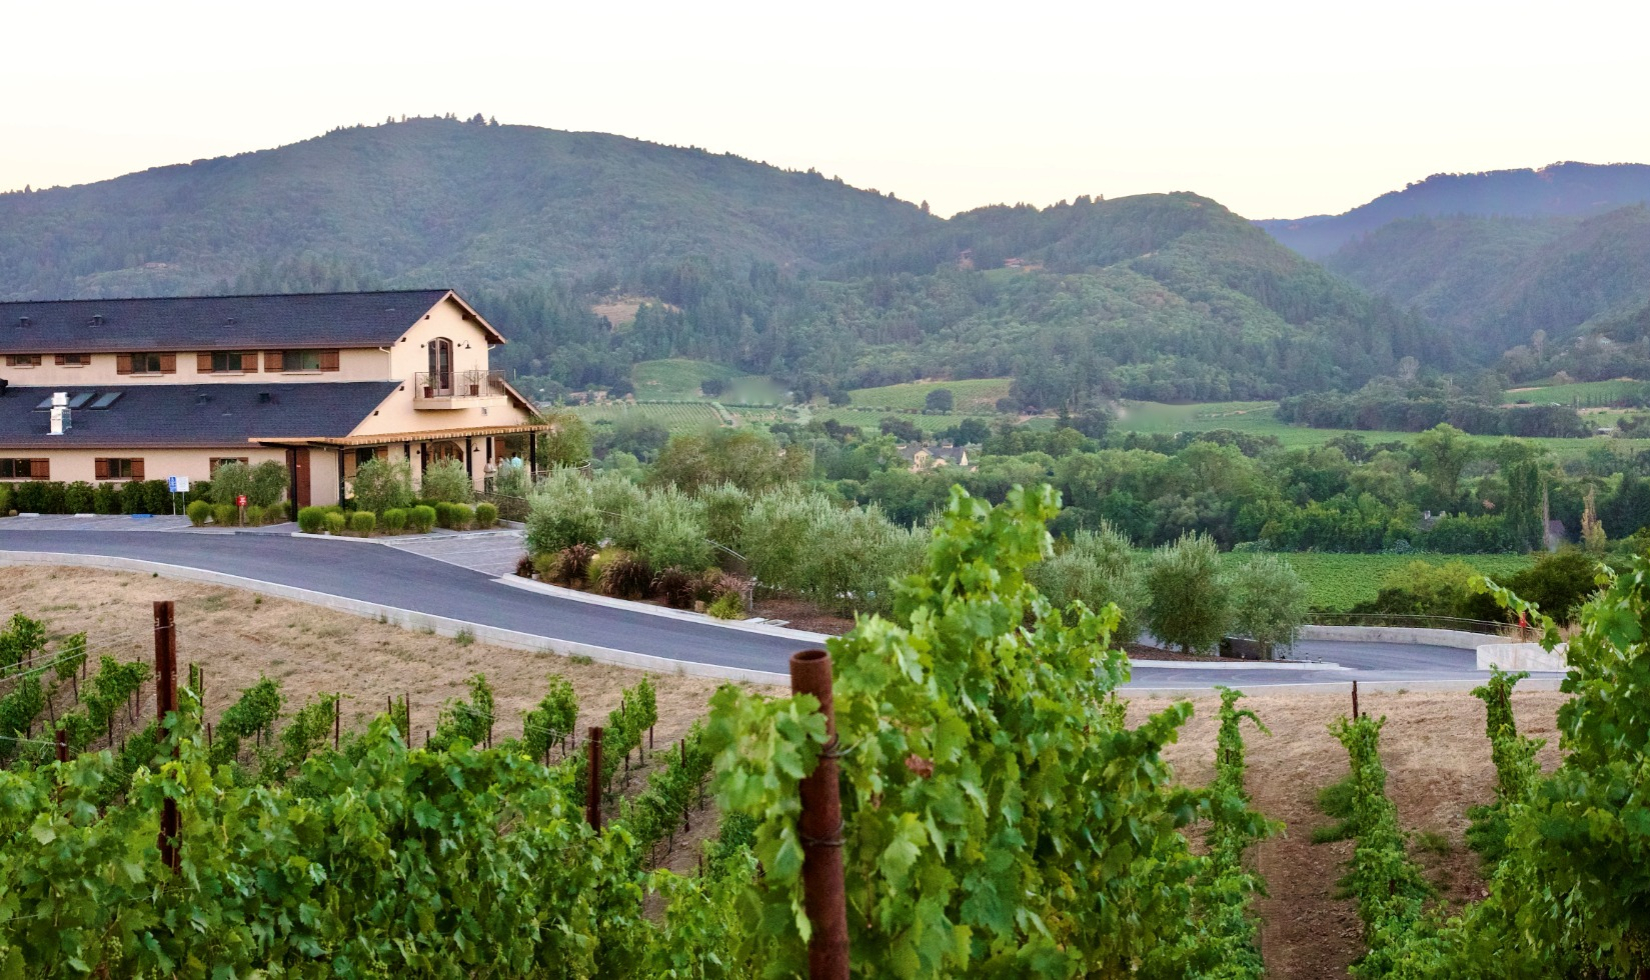 Winery building with rolling hills and vineyard in the background